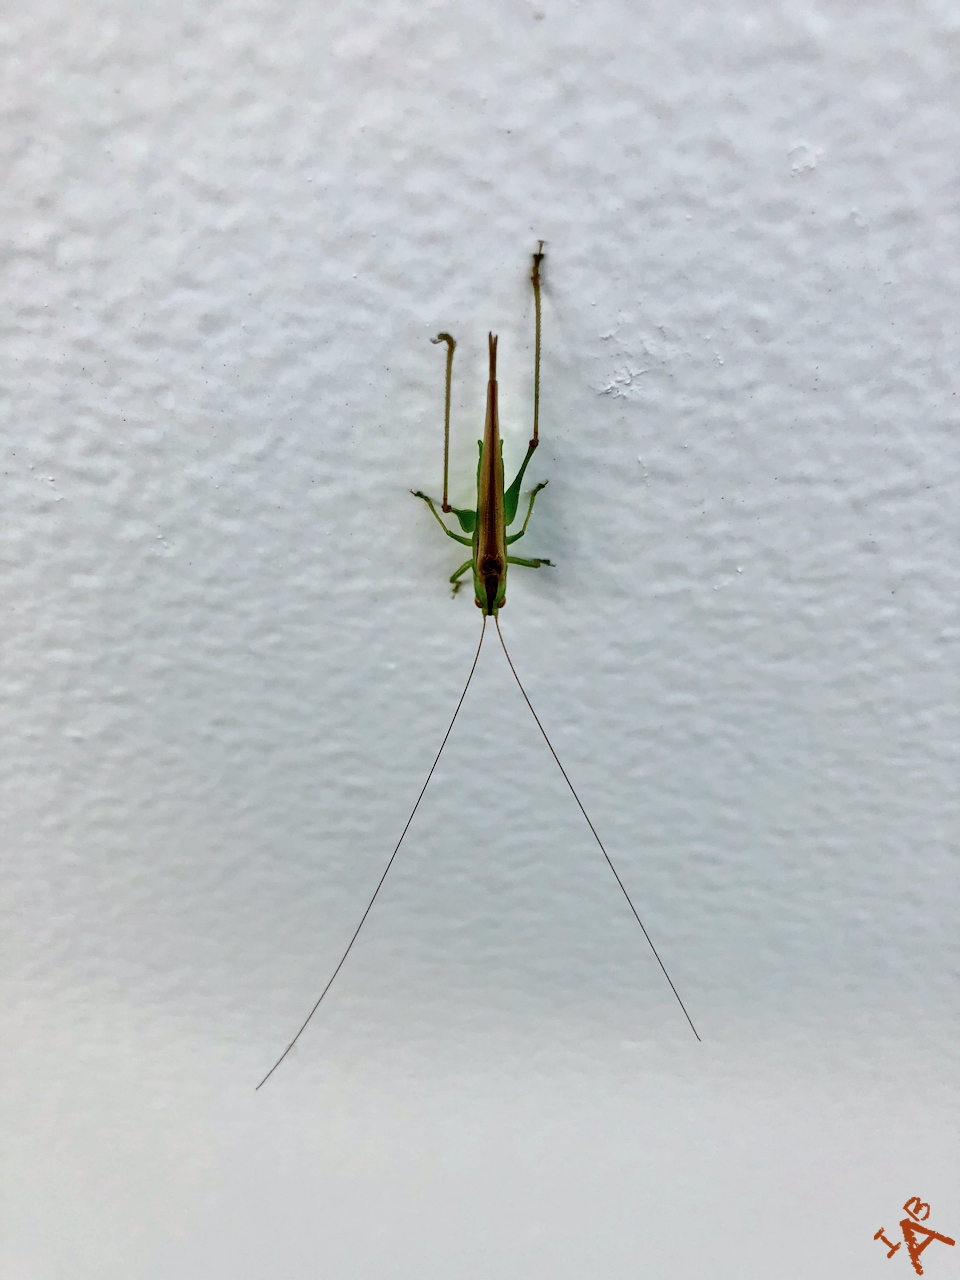 A bug with antennae longer than it's body.